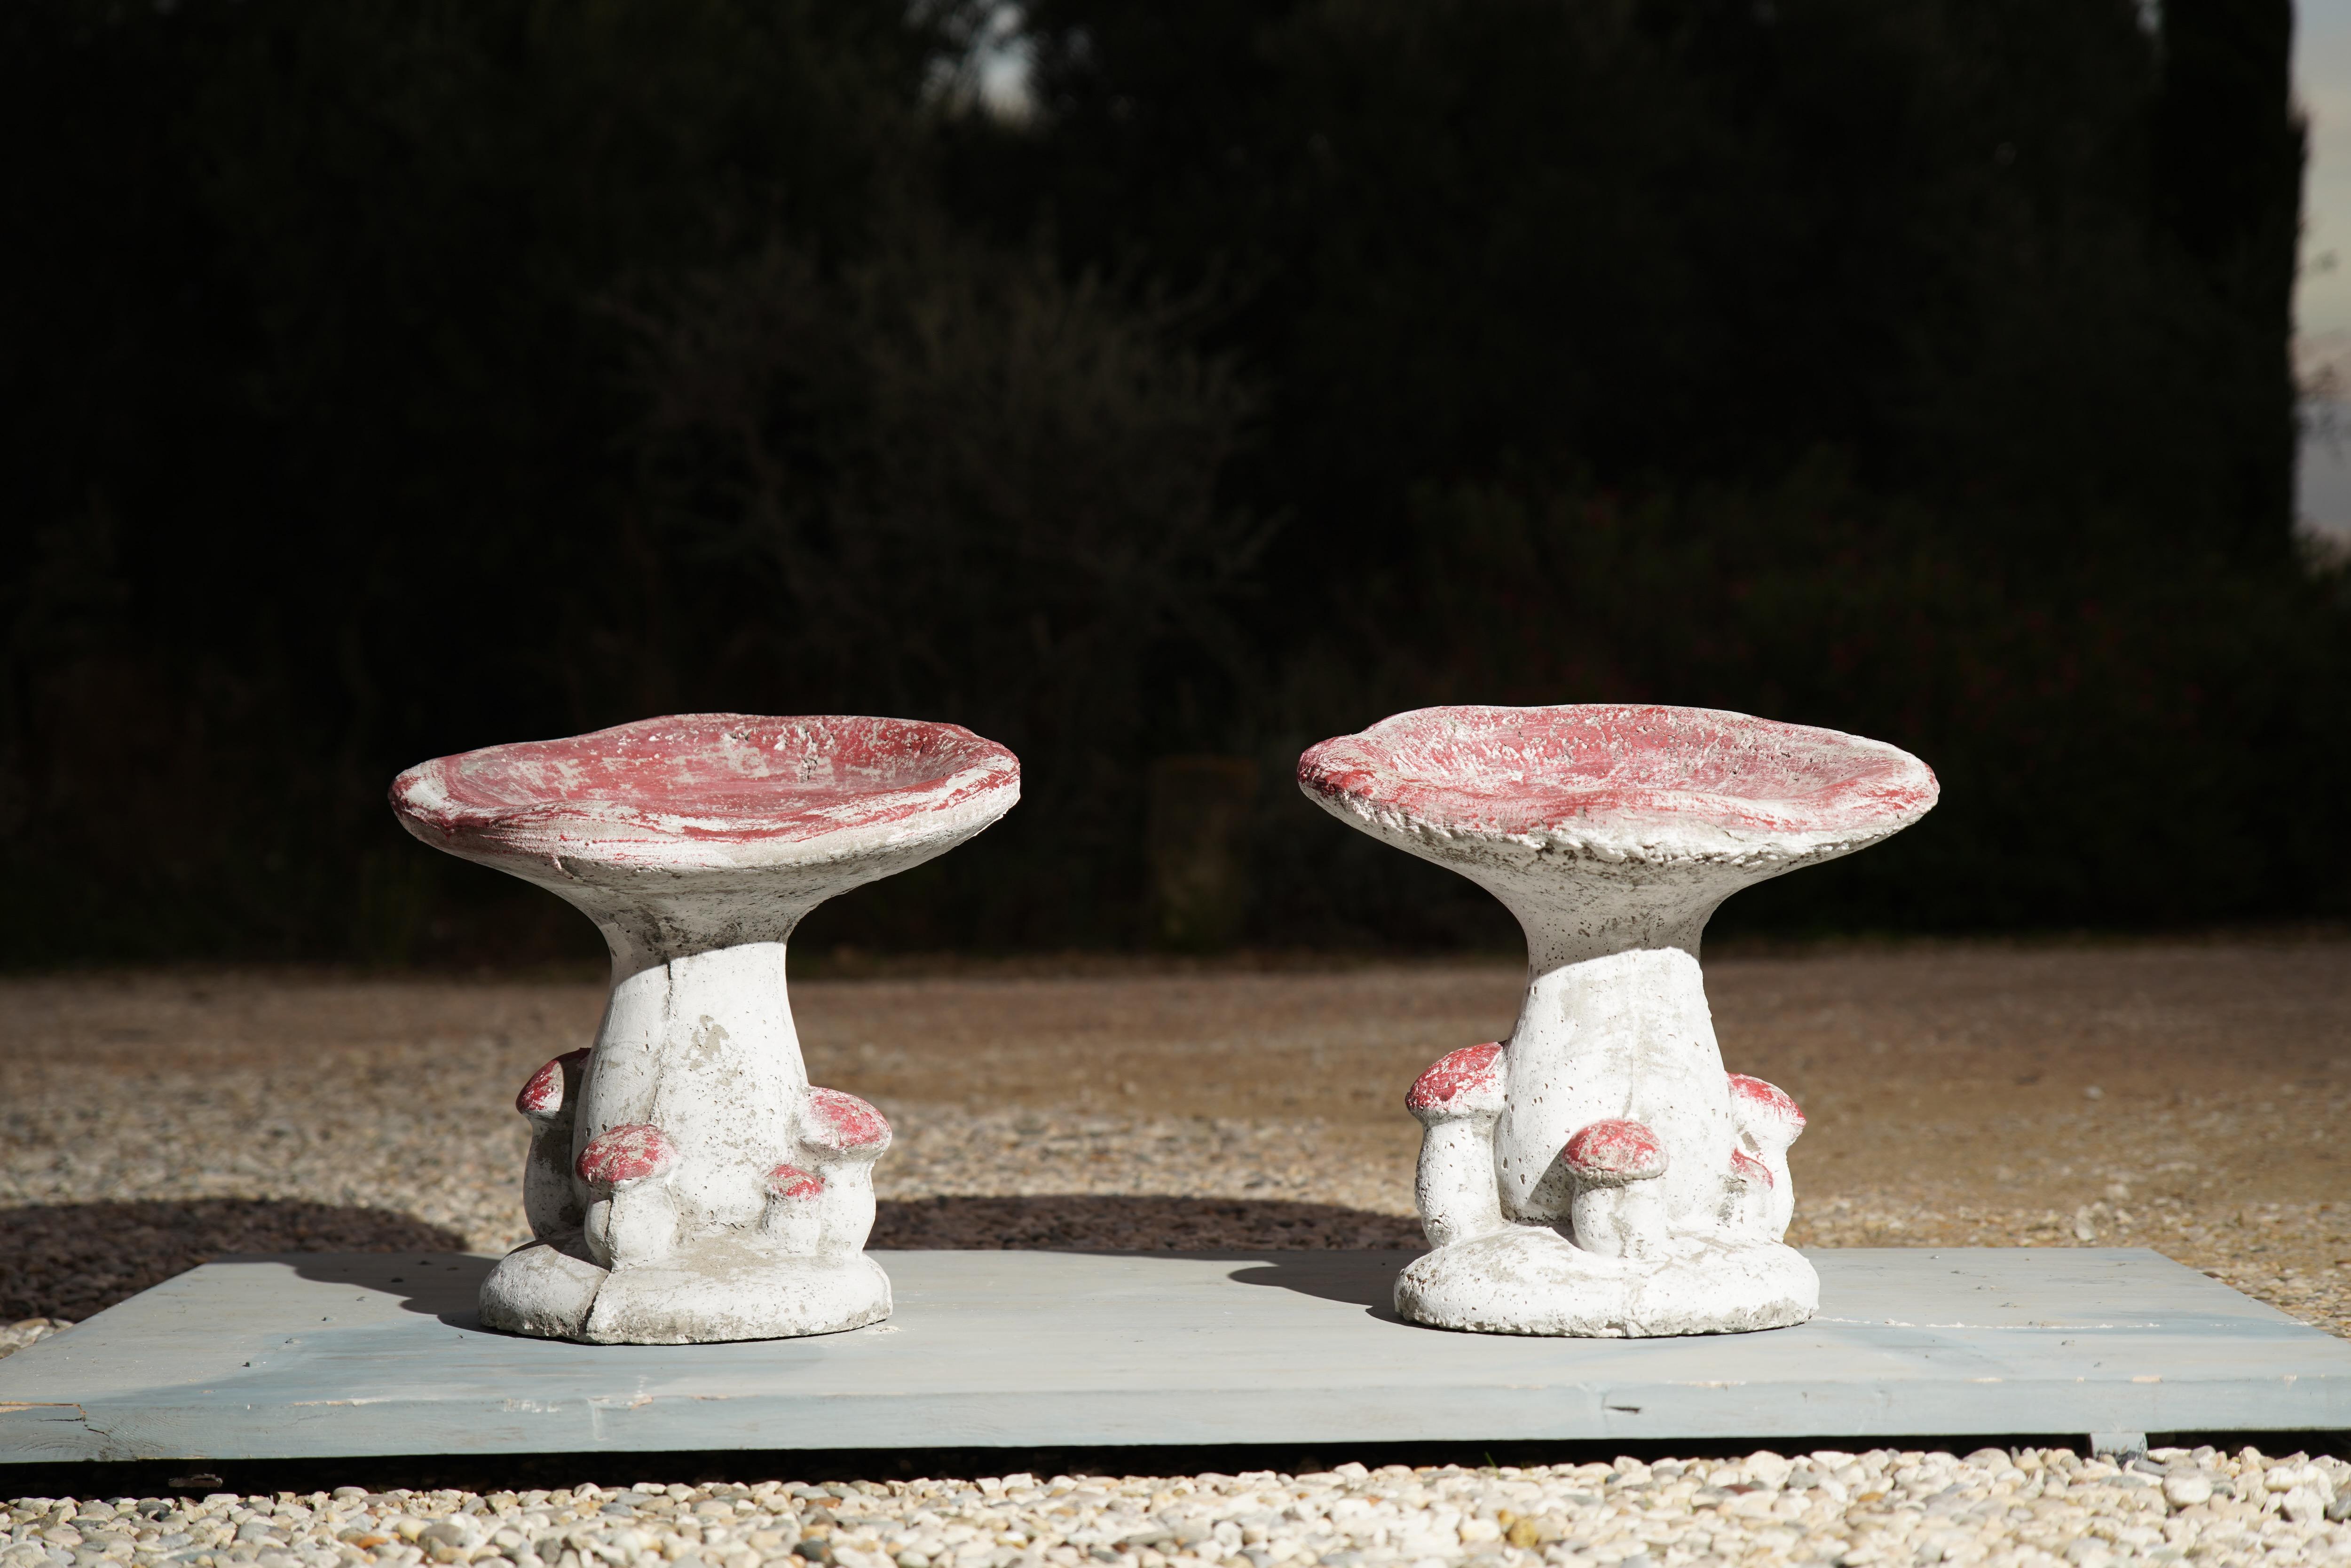 Wonderful 1950s concrete mushroom stools from South West France. Each stool is made of concrete and exceptionally sturdy and heavy (approx. 20kg each). 

Each stool is equipped with a continuous hole, ensuring adequate drainage. They provide a fairy